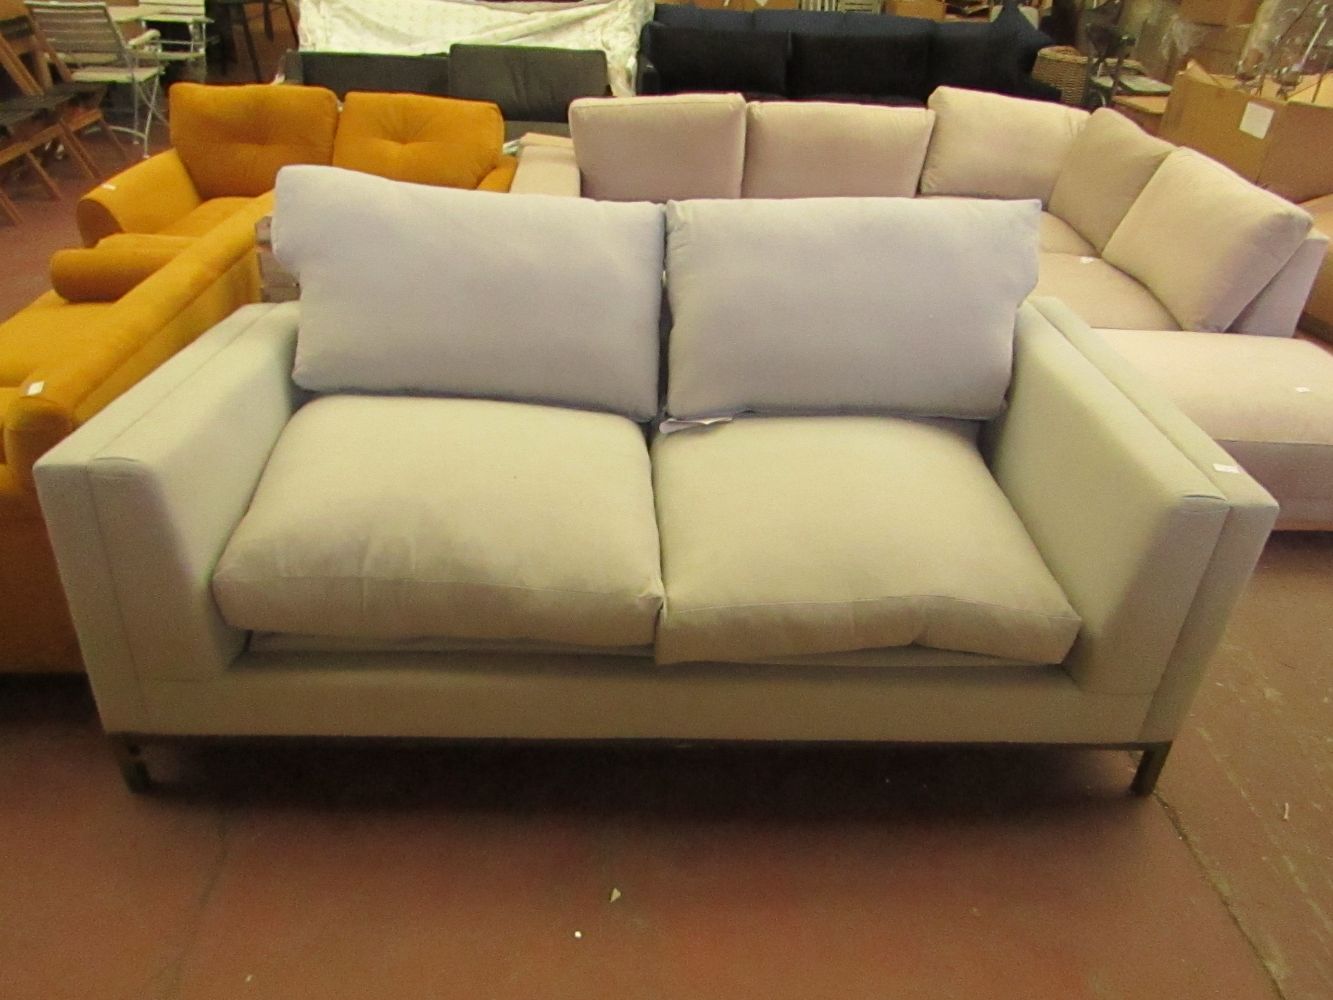 High end Designer Furniture and Swoon sofas, Tom Dixon, Cox & Cox, Hay, Normann, Gubi, Moooi, Made.com and more